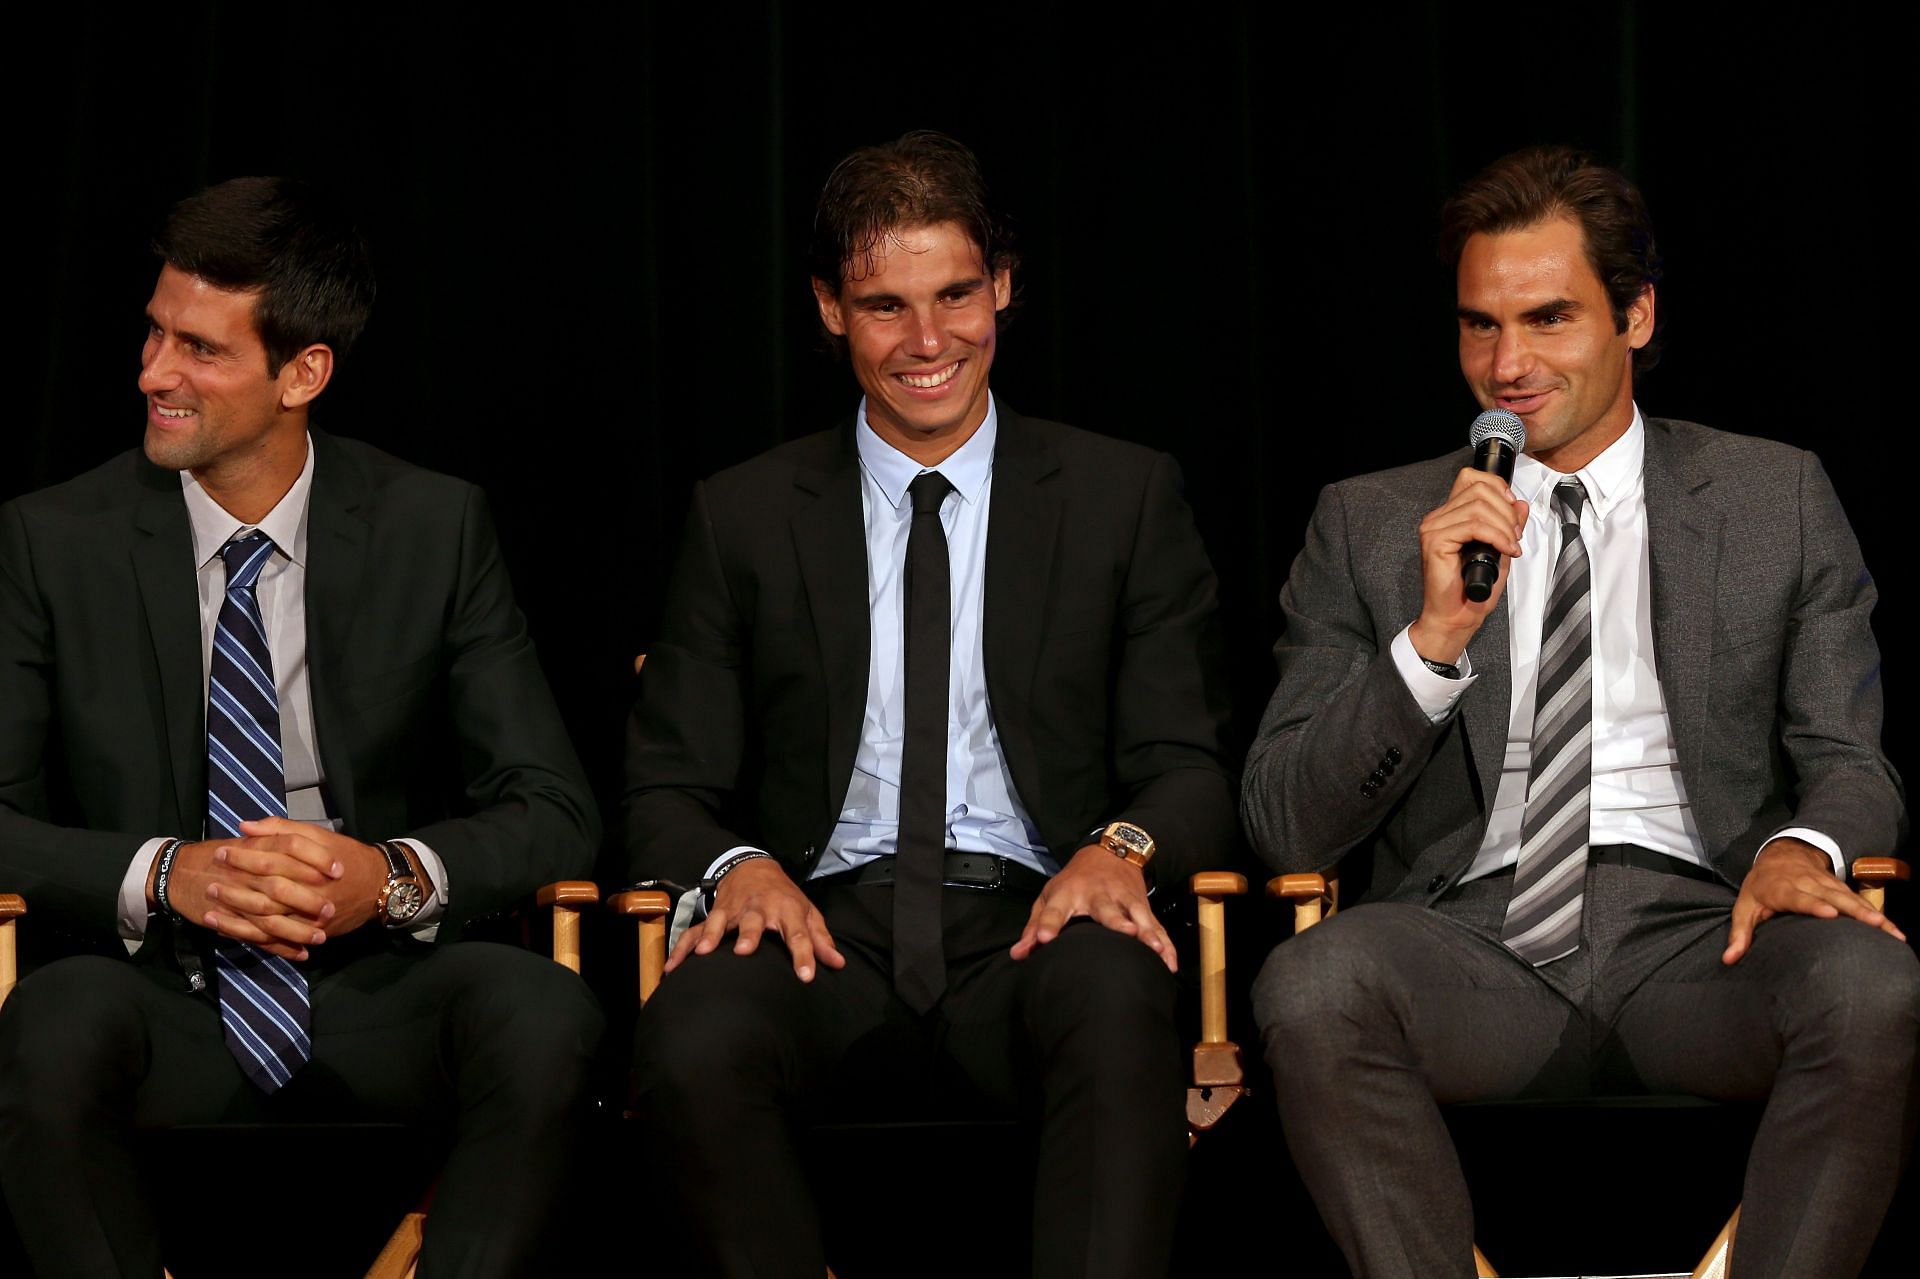 Roger Federer, Rafael Nadal and Novak Djokovic are synonymous with the GOAT debate.